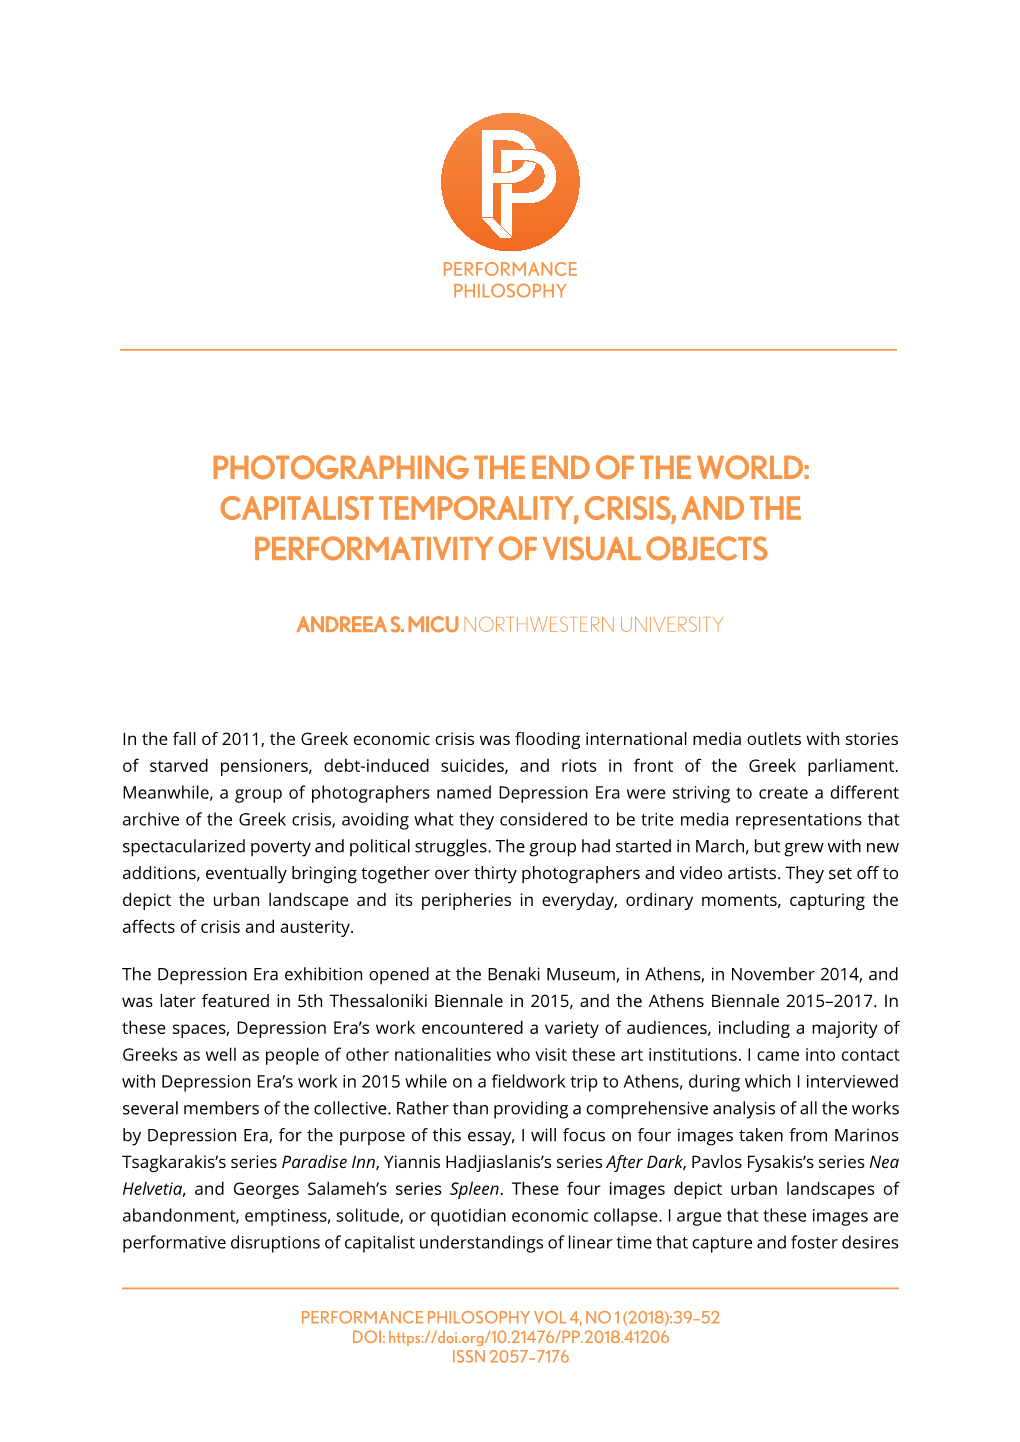 Photographing the End of the World: Capitalist Temporality, Crisis, and the Performativity of Visual Objects